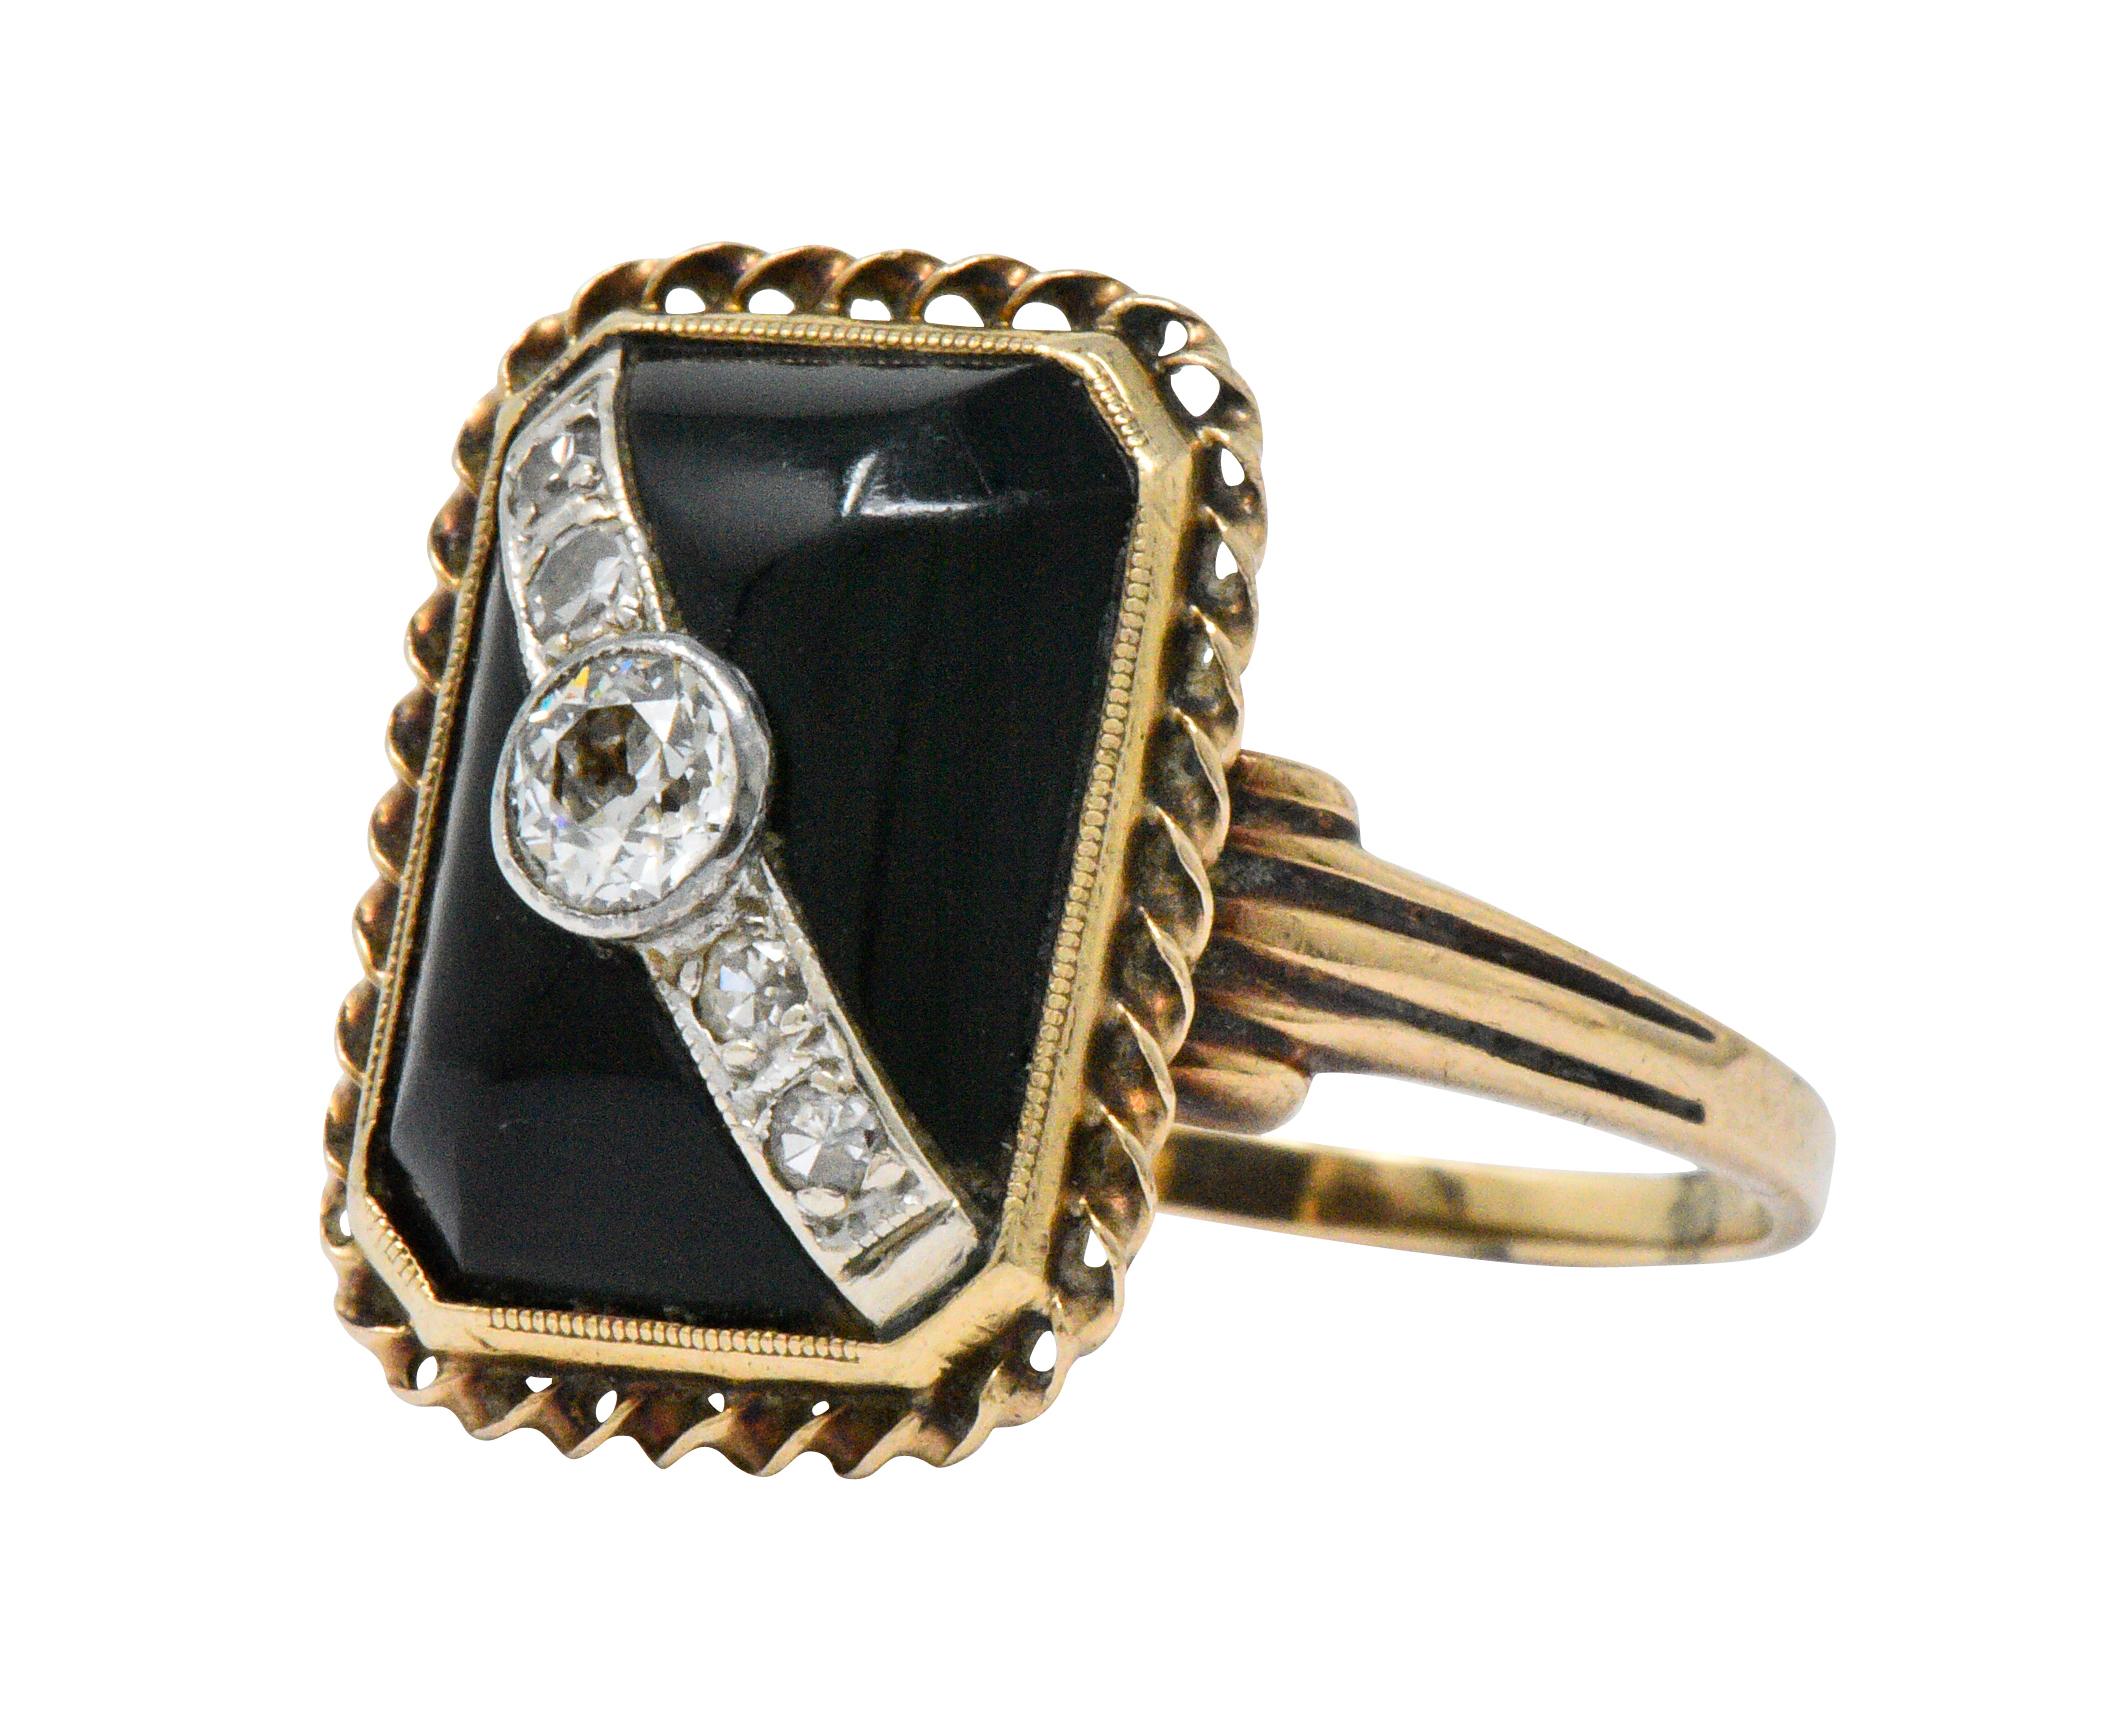 Centering an old European cut diamond with single cut diamond accents, weighing approximately 0.25 carats total, eye-clean and white

Buff-top onyx with twisted gold frame

Tested as 10k gold

Ring Size: 5 3/4 & Sizable

Top measures 16.8 mm and